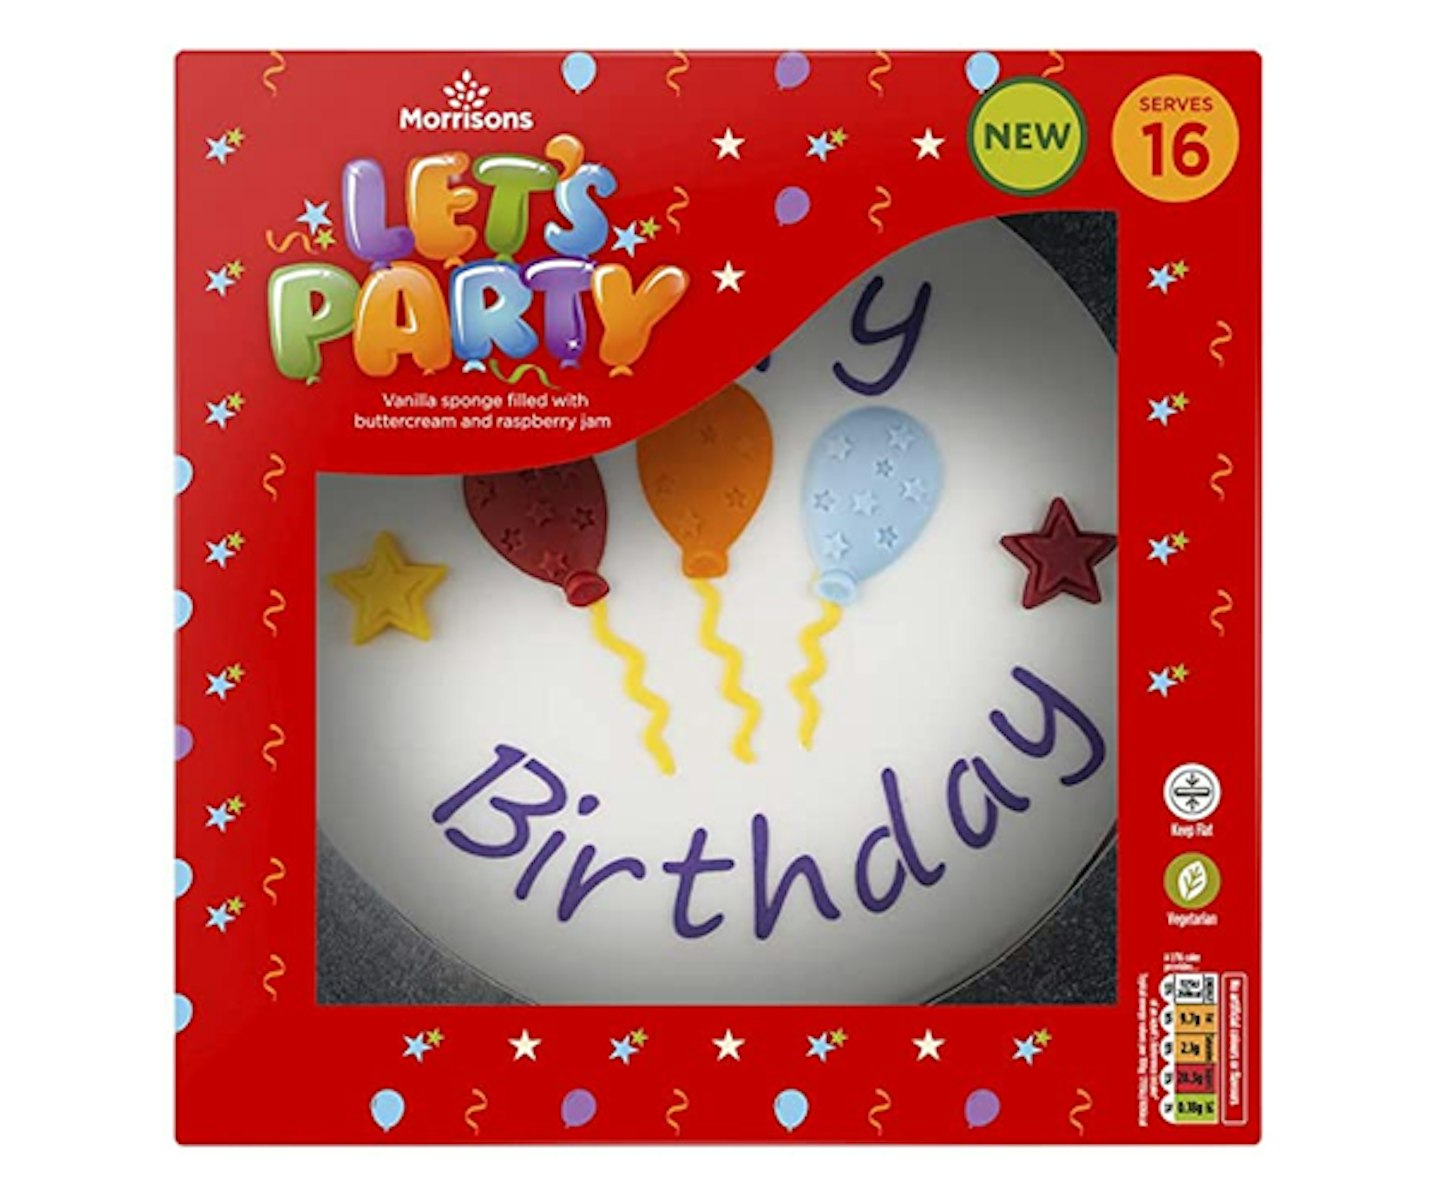 Morrisons Let's Party Cake